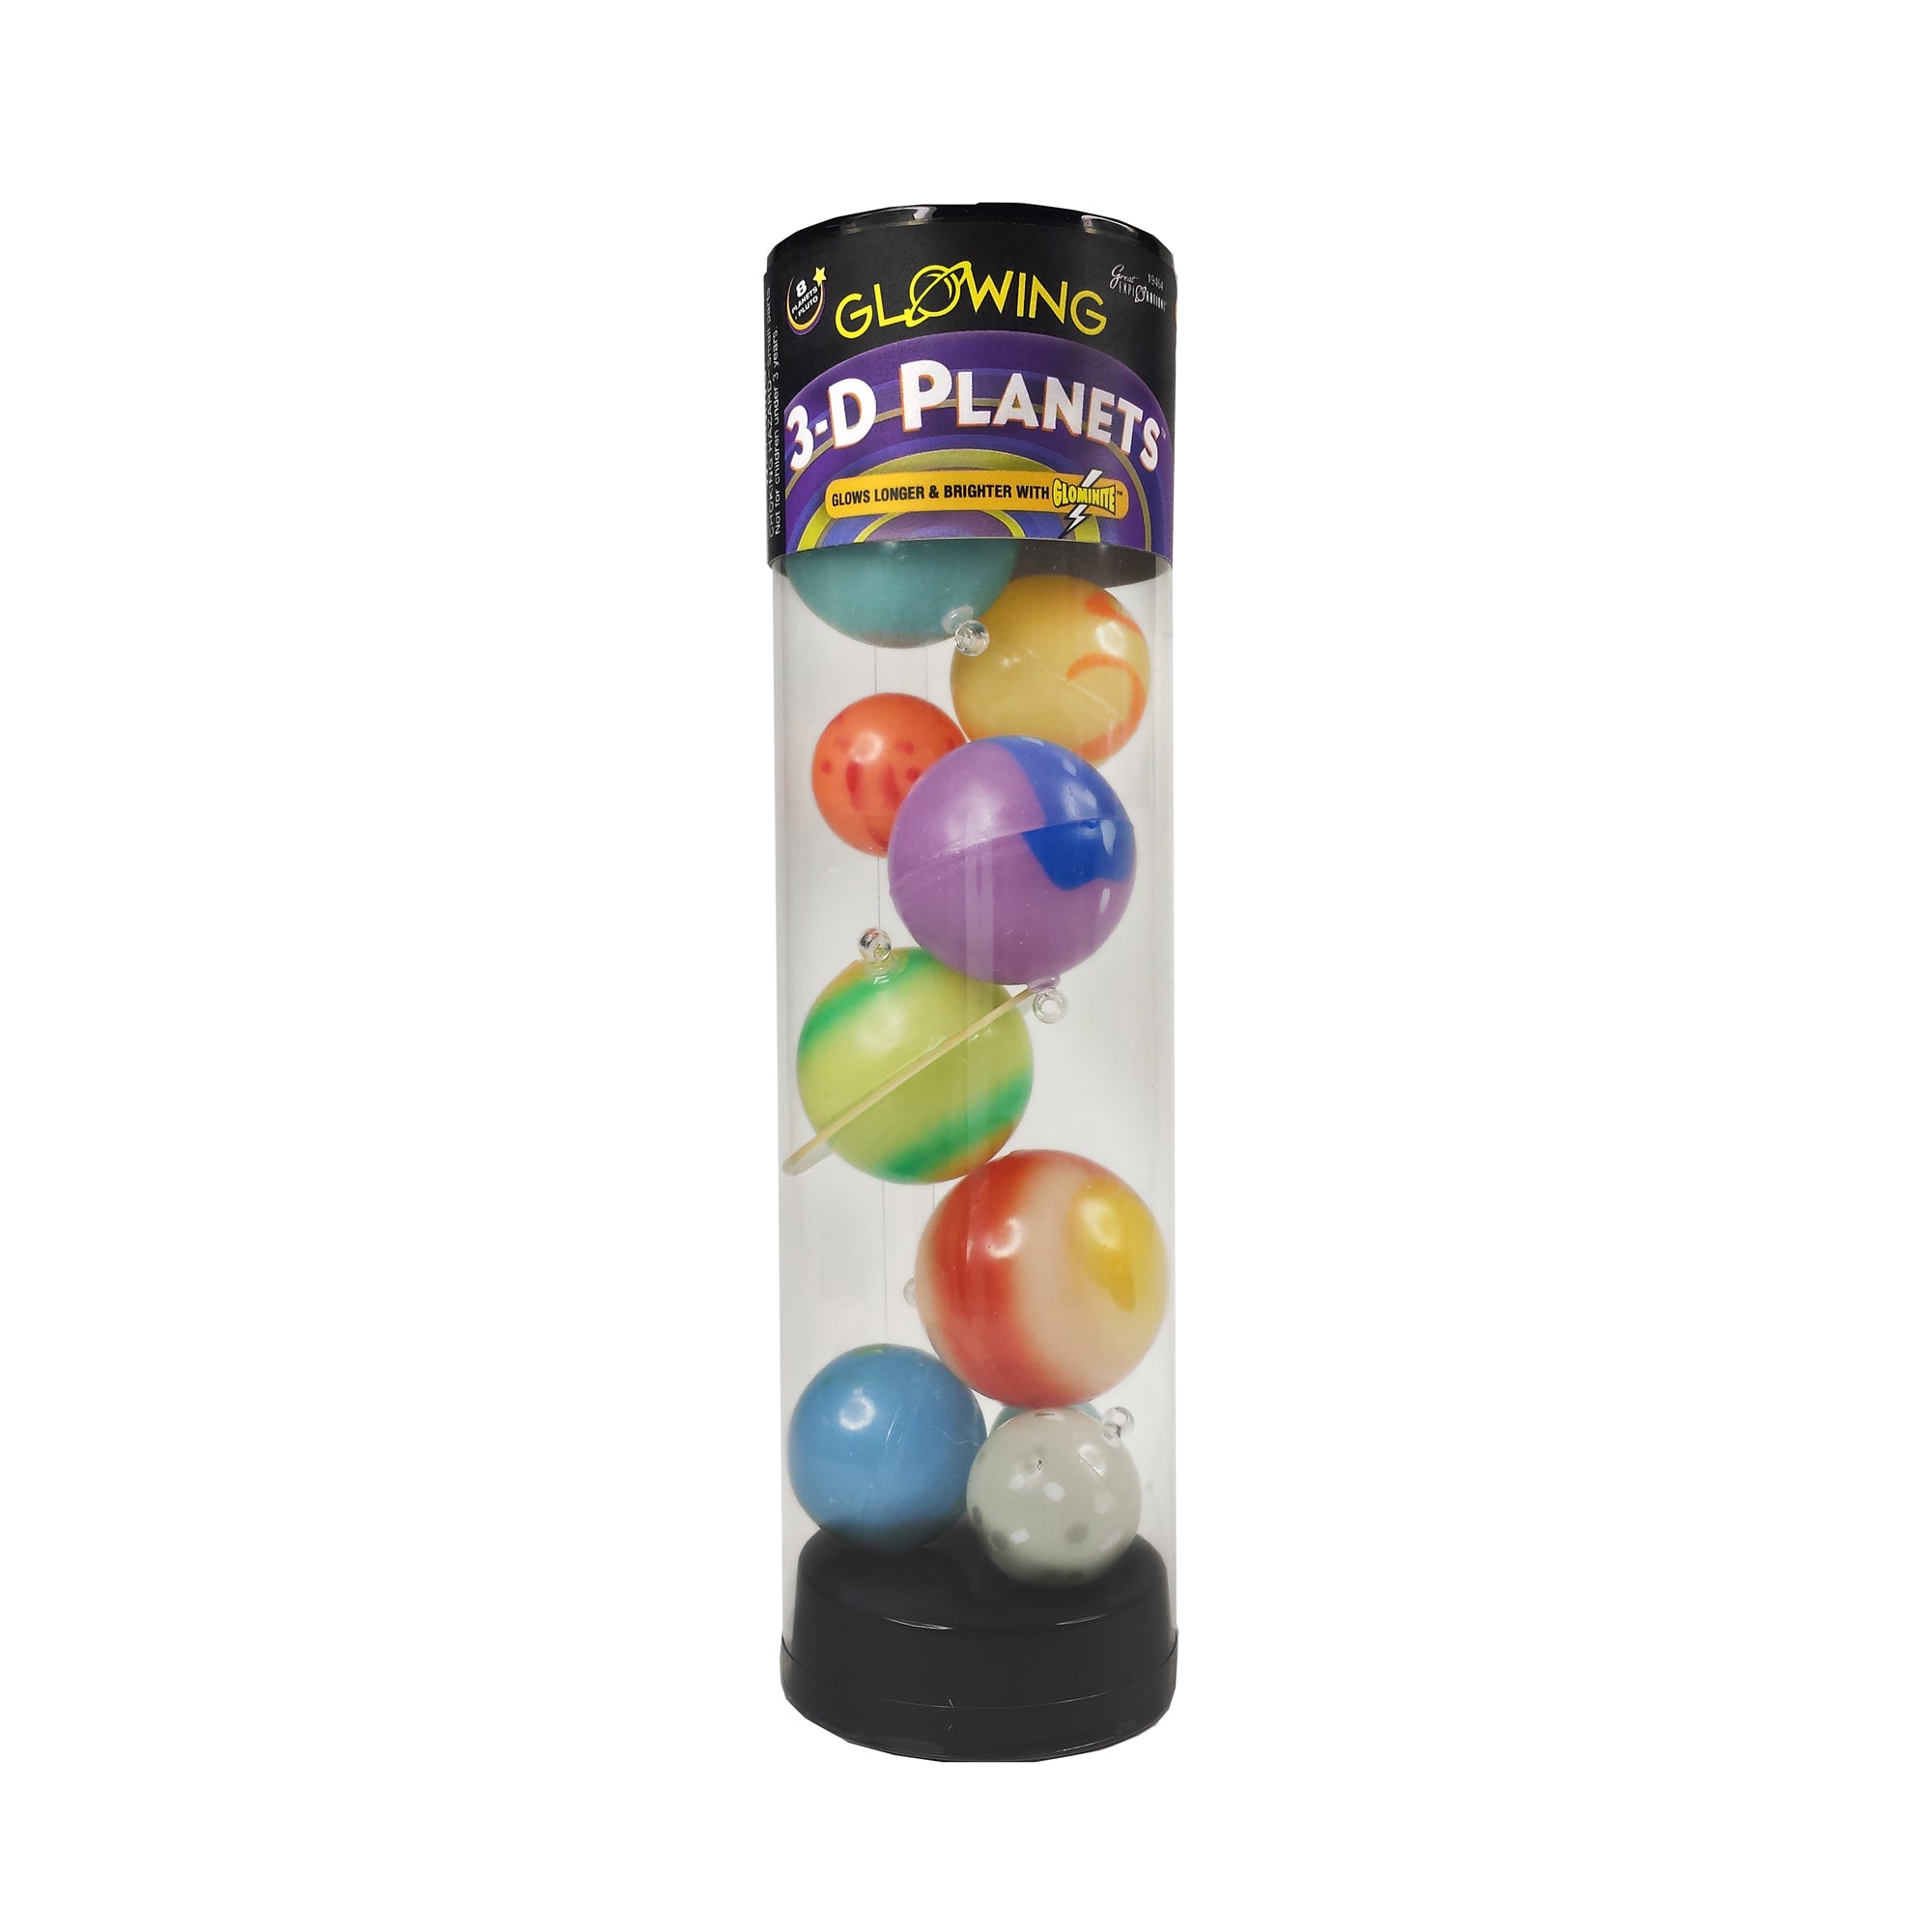 Glowing 3-D Planets in a Tube